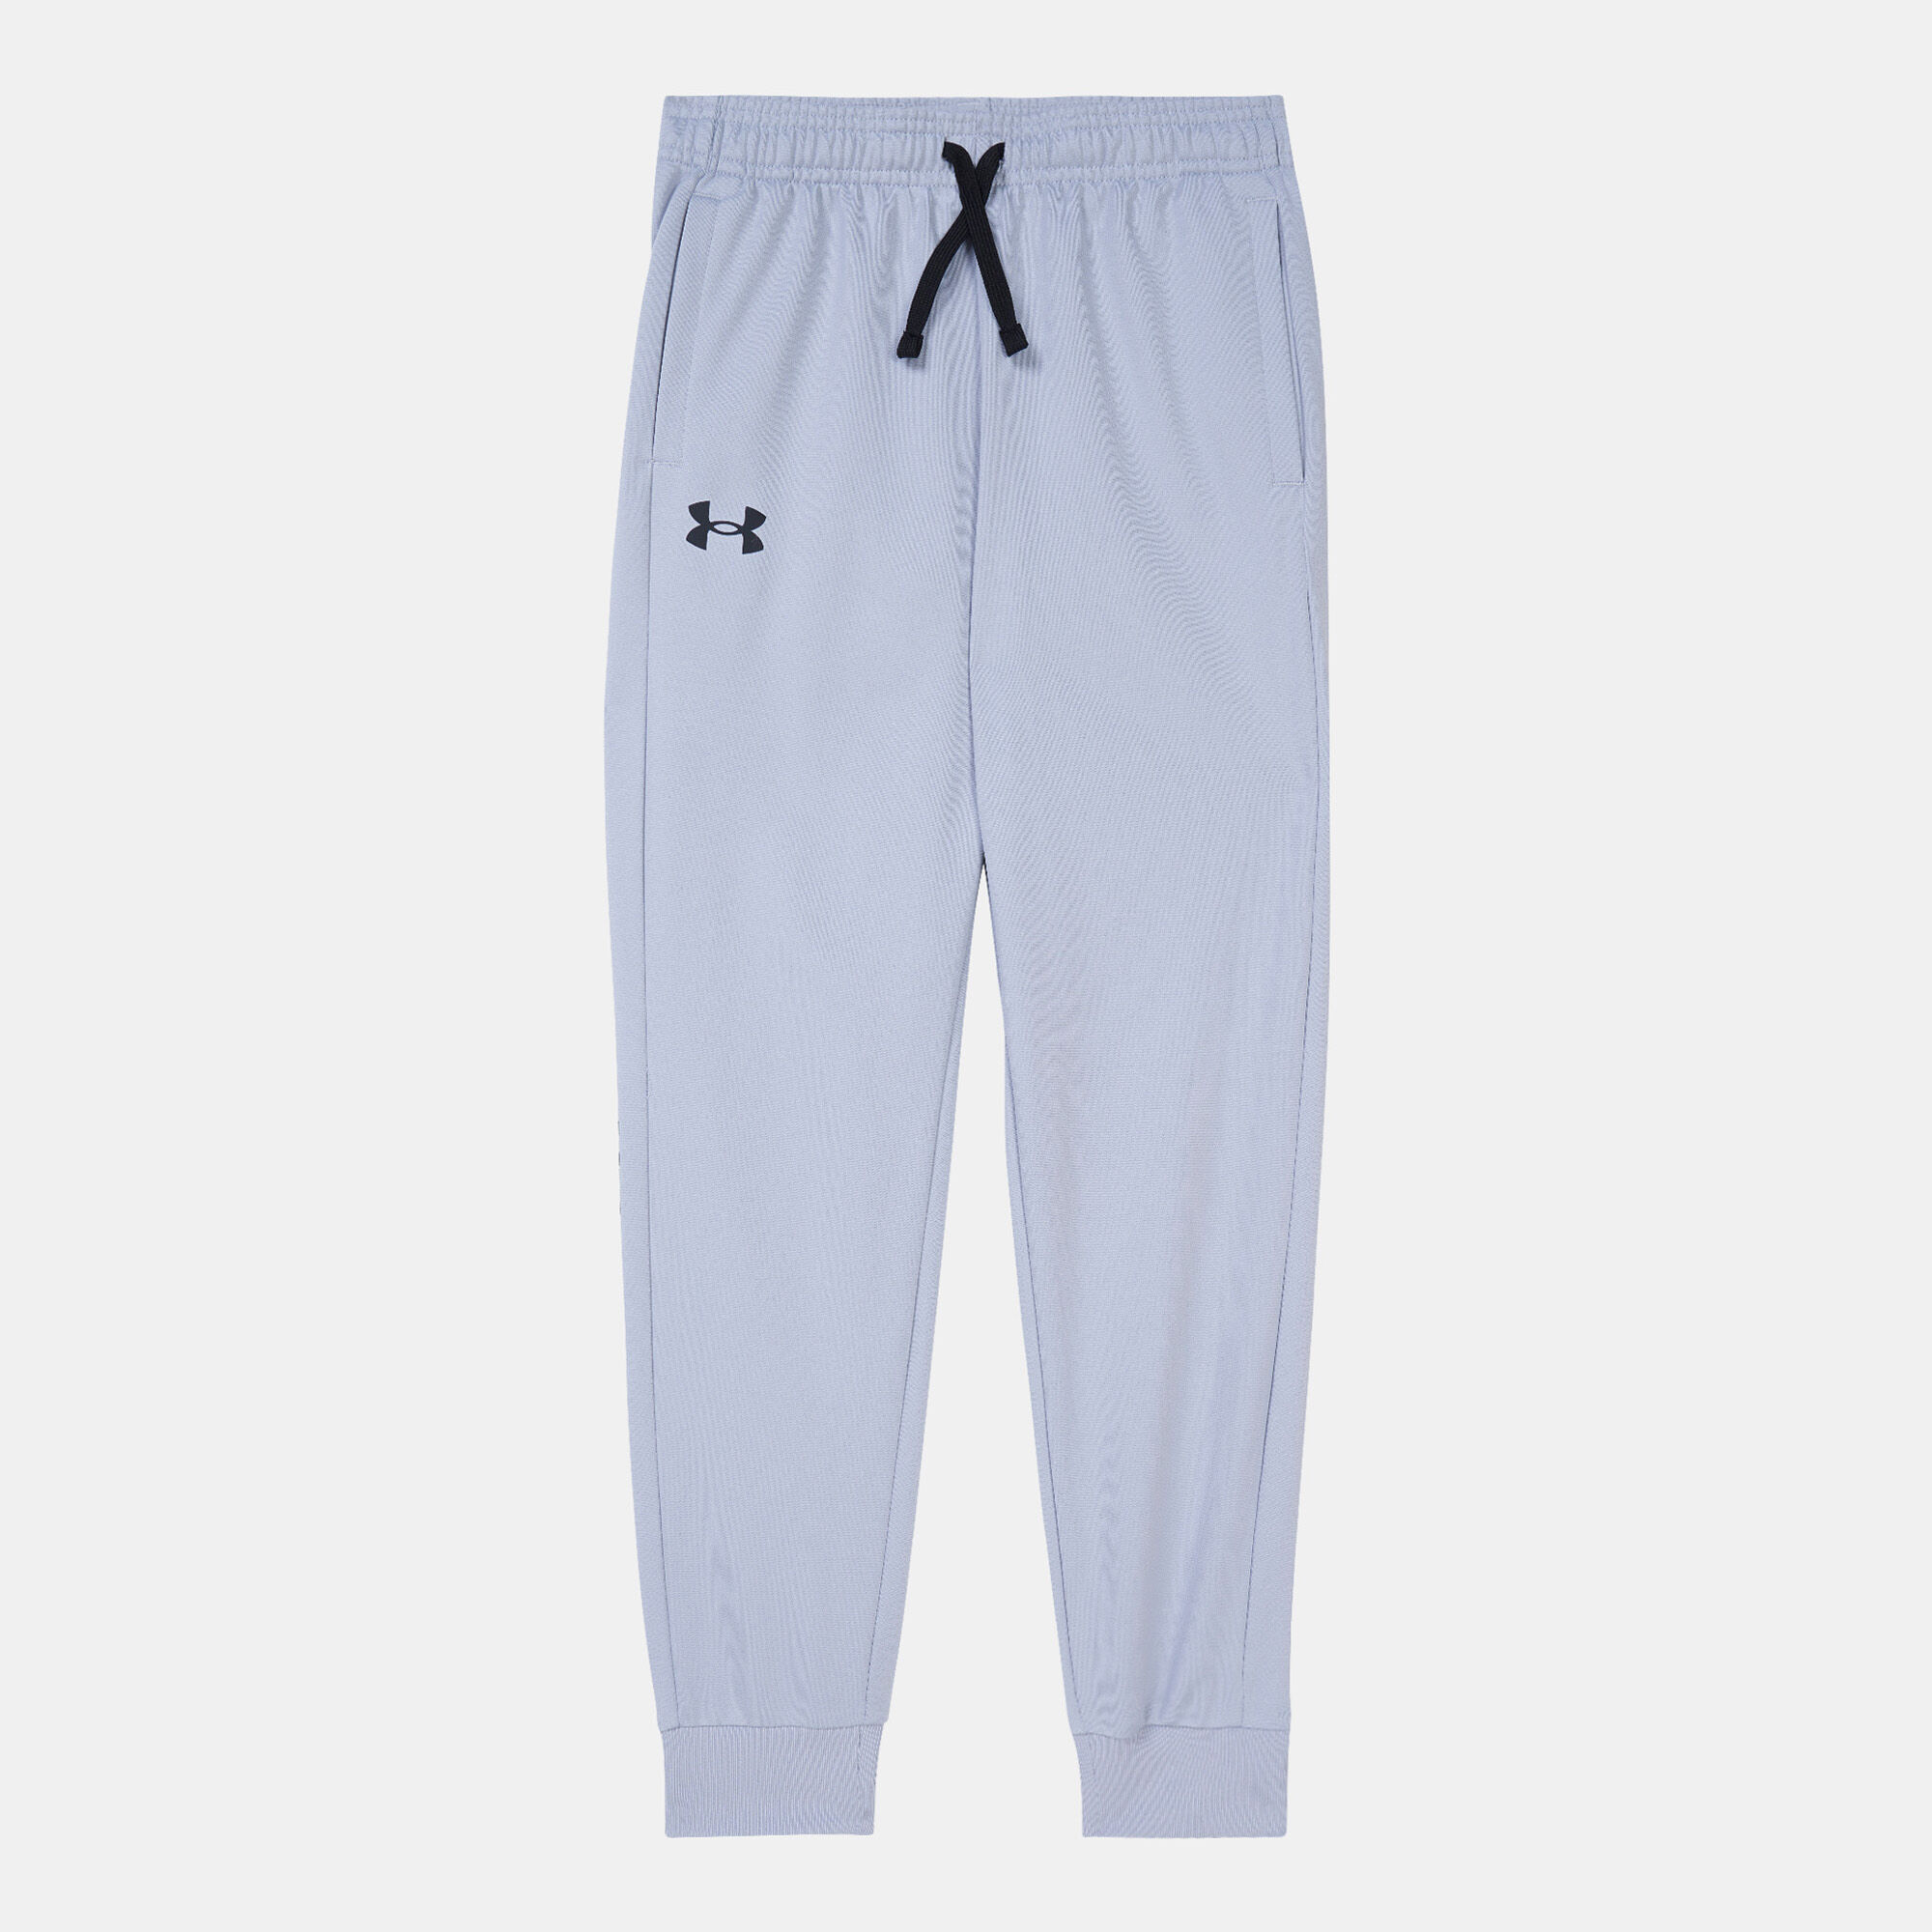 Under Armour Boys' Pennant Tapered Pants | Dick's Sporting Goods